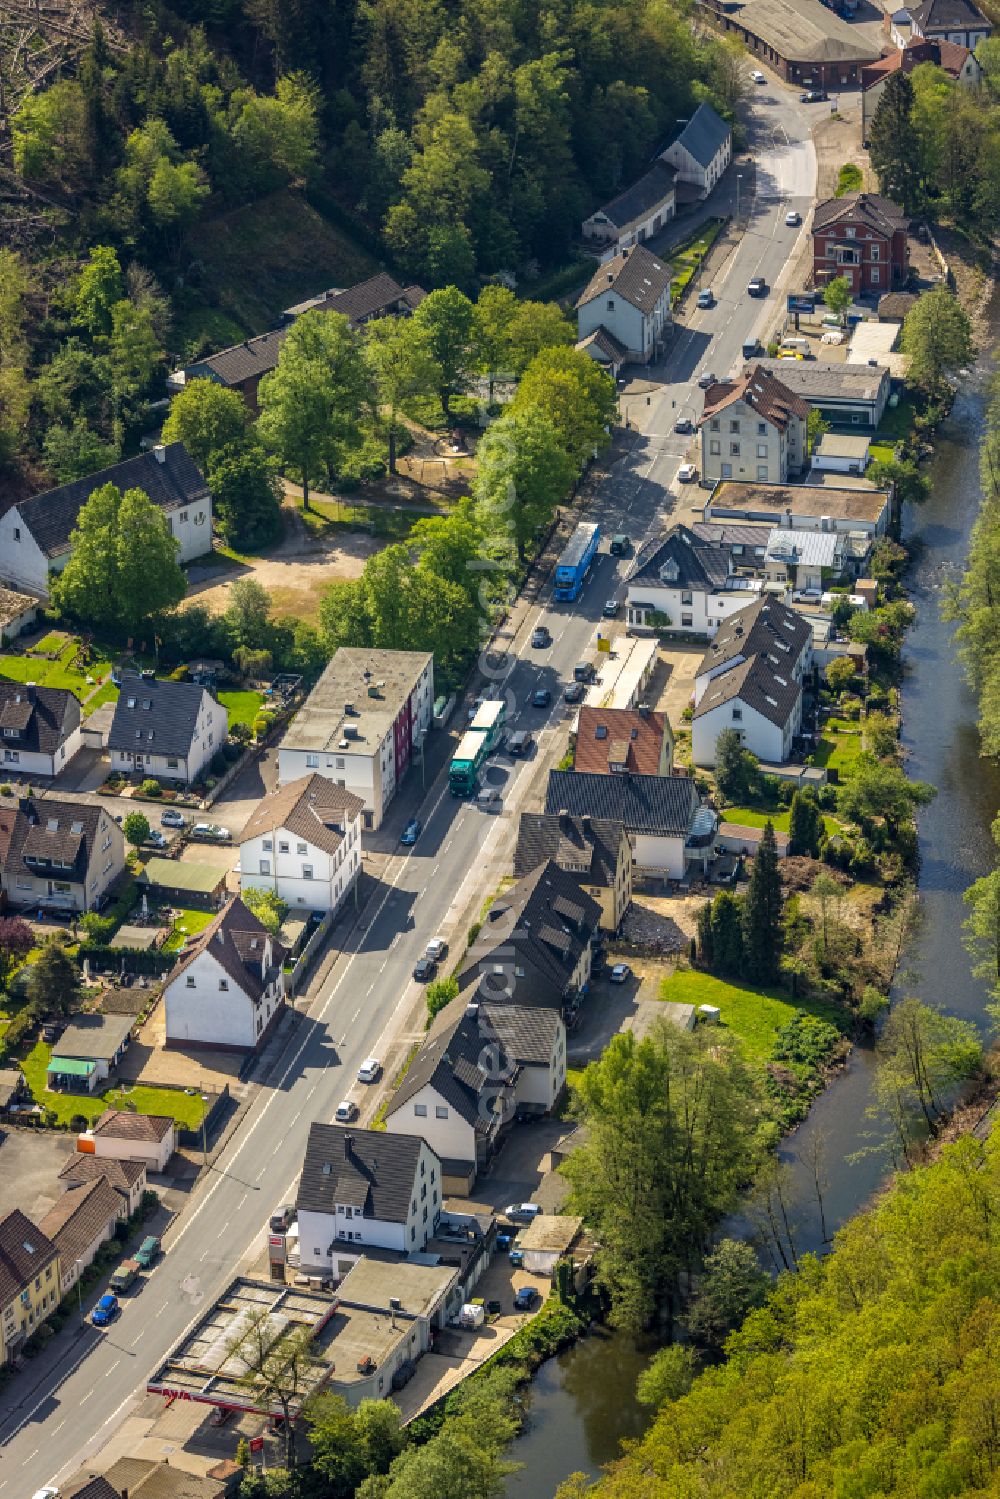 Priorei from above - Village - view on the edge of forested areas in Priorei in the state North Rhine-Westphalia, Germany